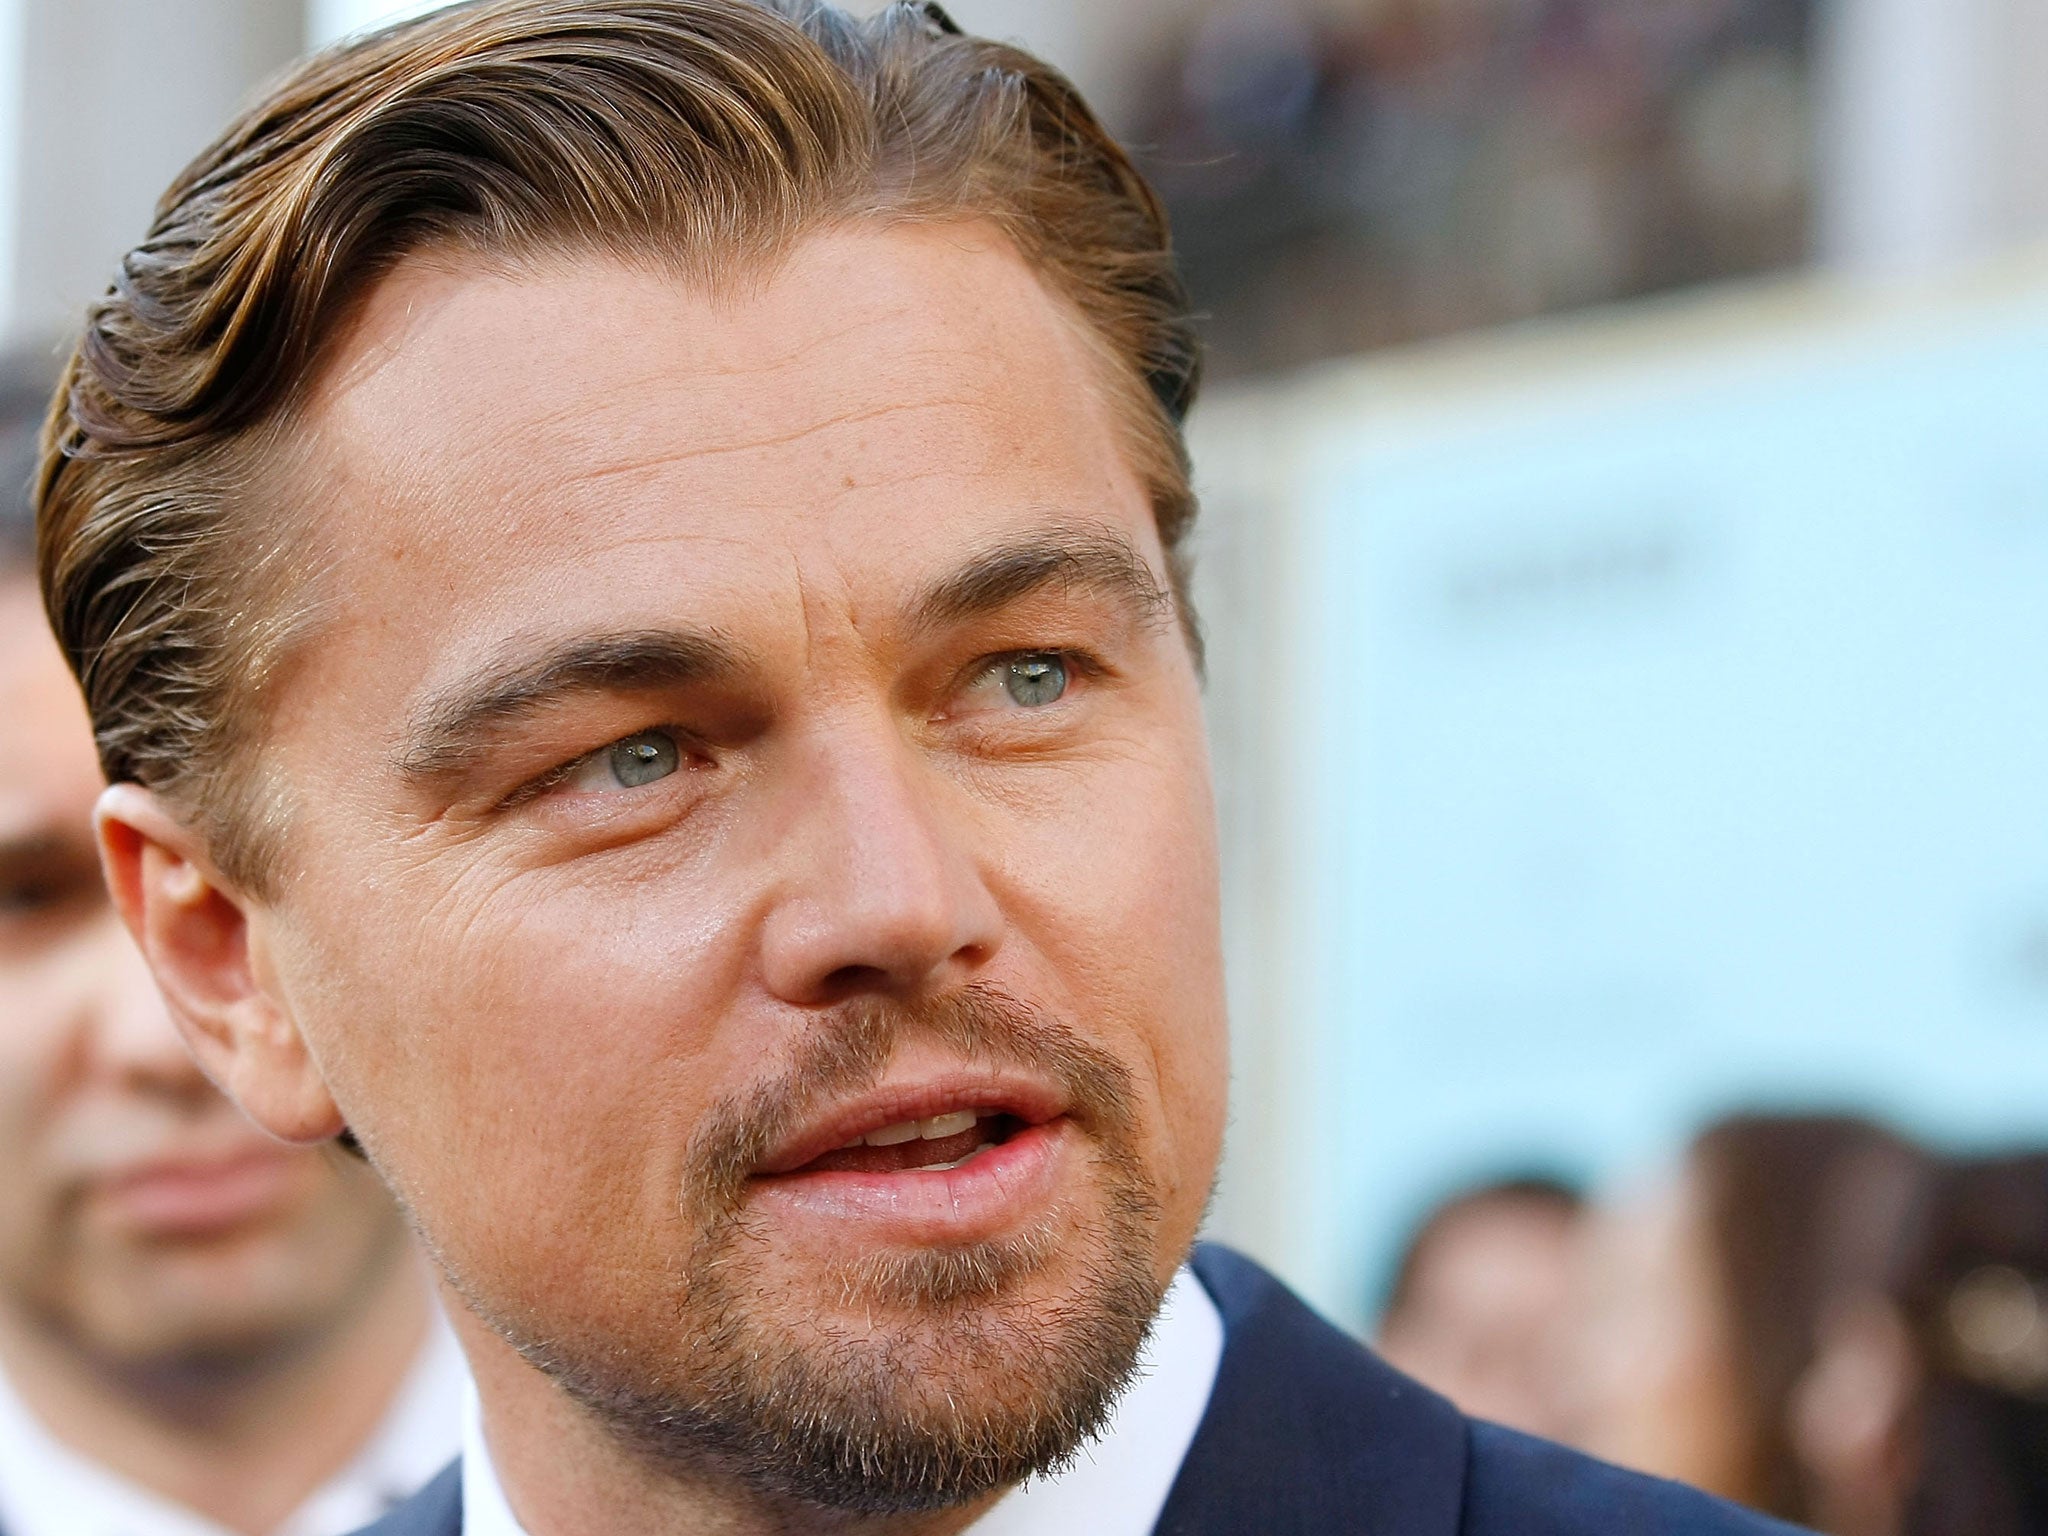 Leonardo DiCaprio is the most popular Best Actor nominee according to worldwide search trends, but will he take home the Oscar?